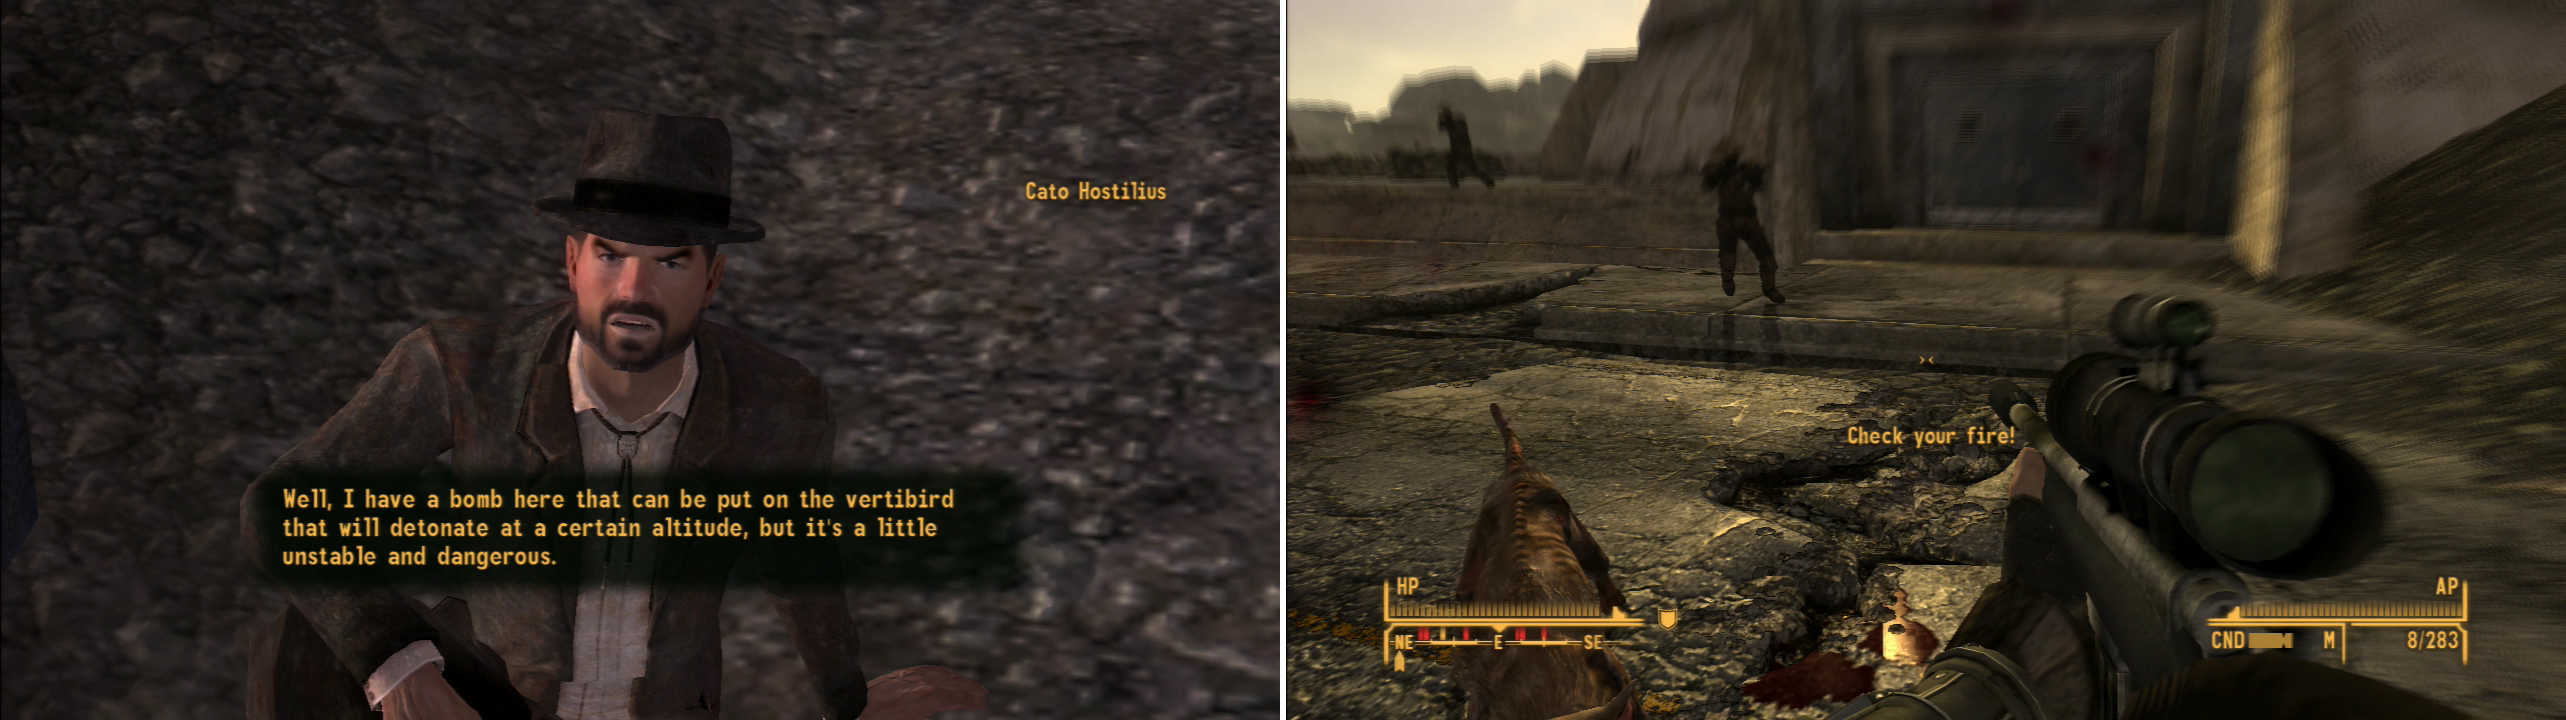 Prove that you’re not incompetent with Explosives and Cato Hostilius will give you a bomb you can plant on the President’s vertibird (left). Whatever you do, stay away from NCR Rangers patrolling around the Hoover Dam (right). Normal NCR Troopers may not see through your disguise, by Rangers will.